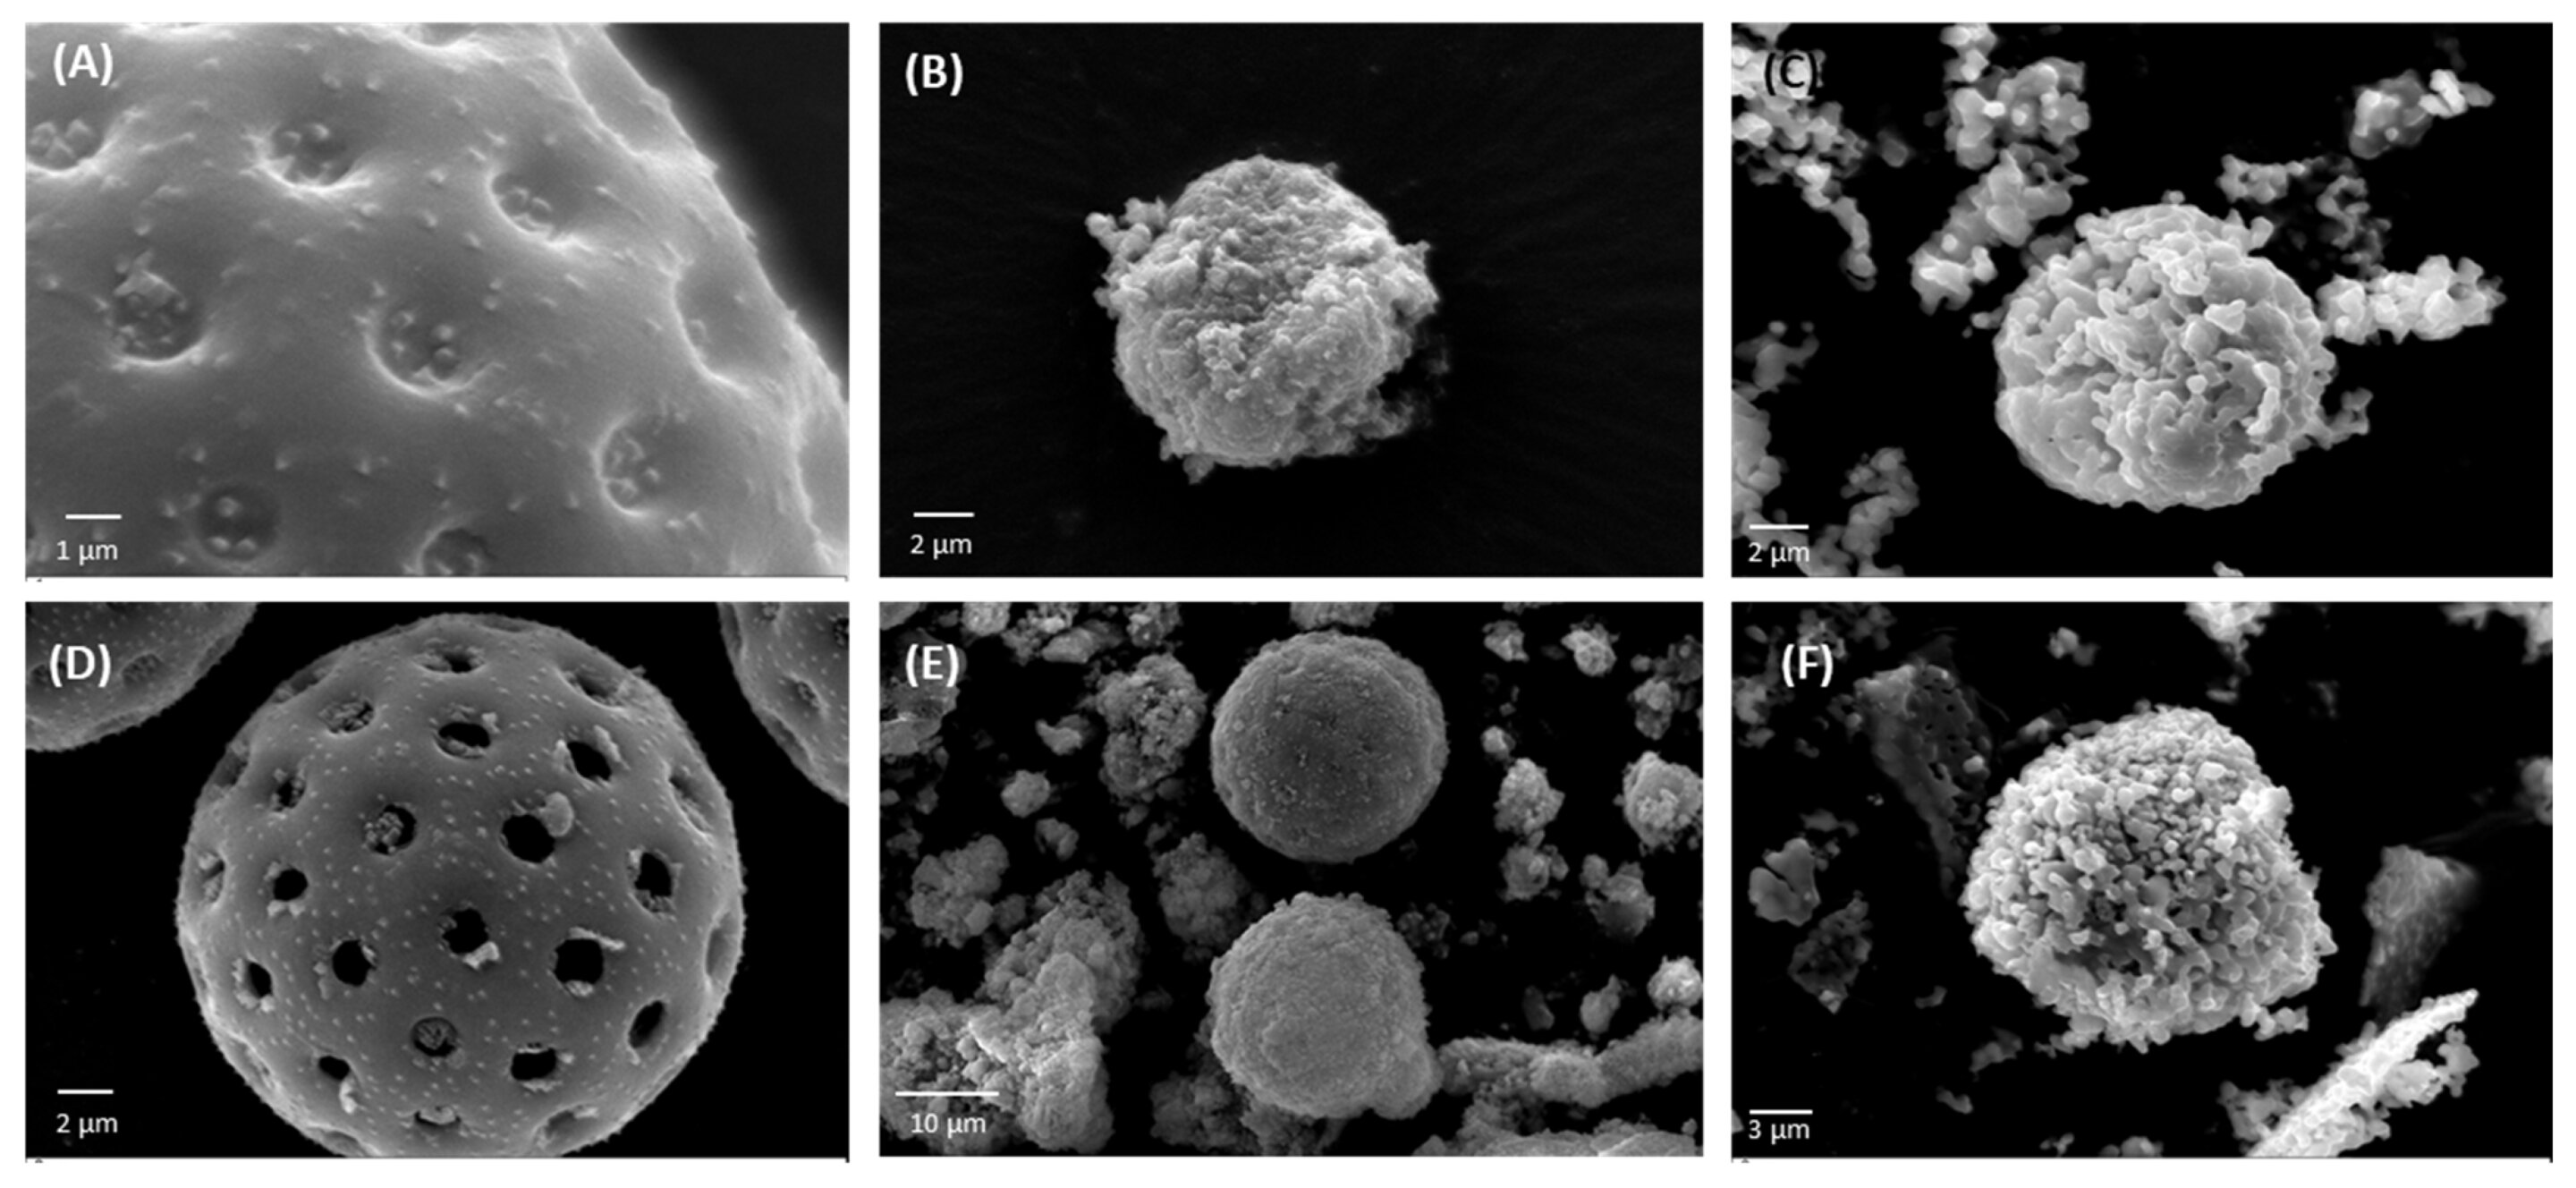 Pollen is a promising sustainable tool in the bone regeneration process